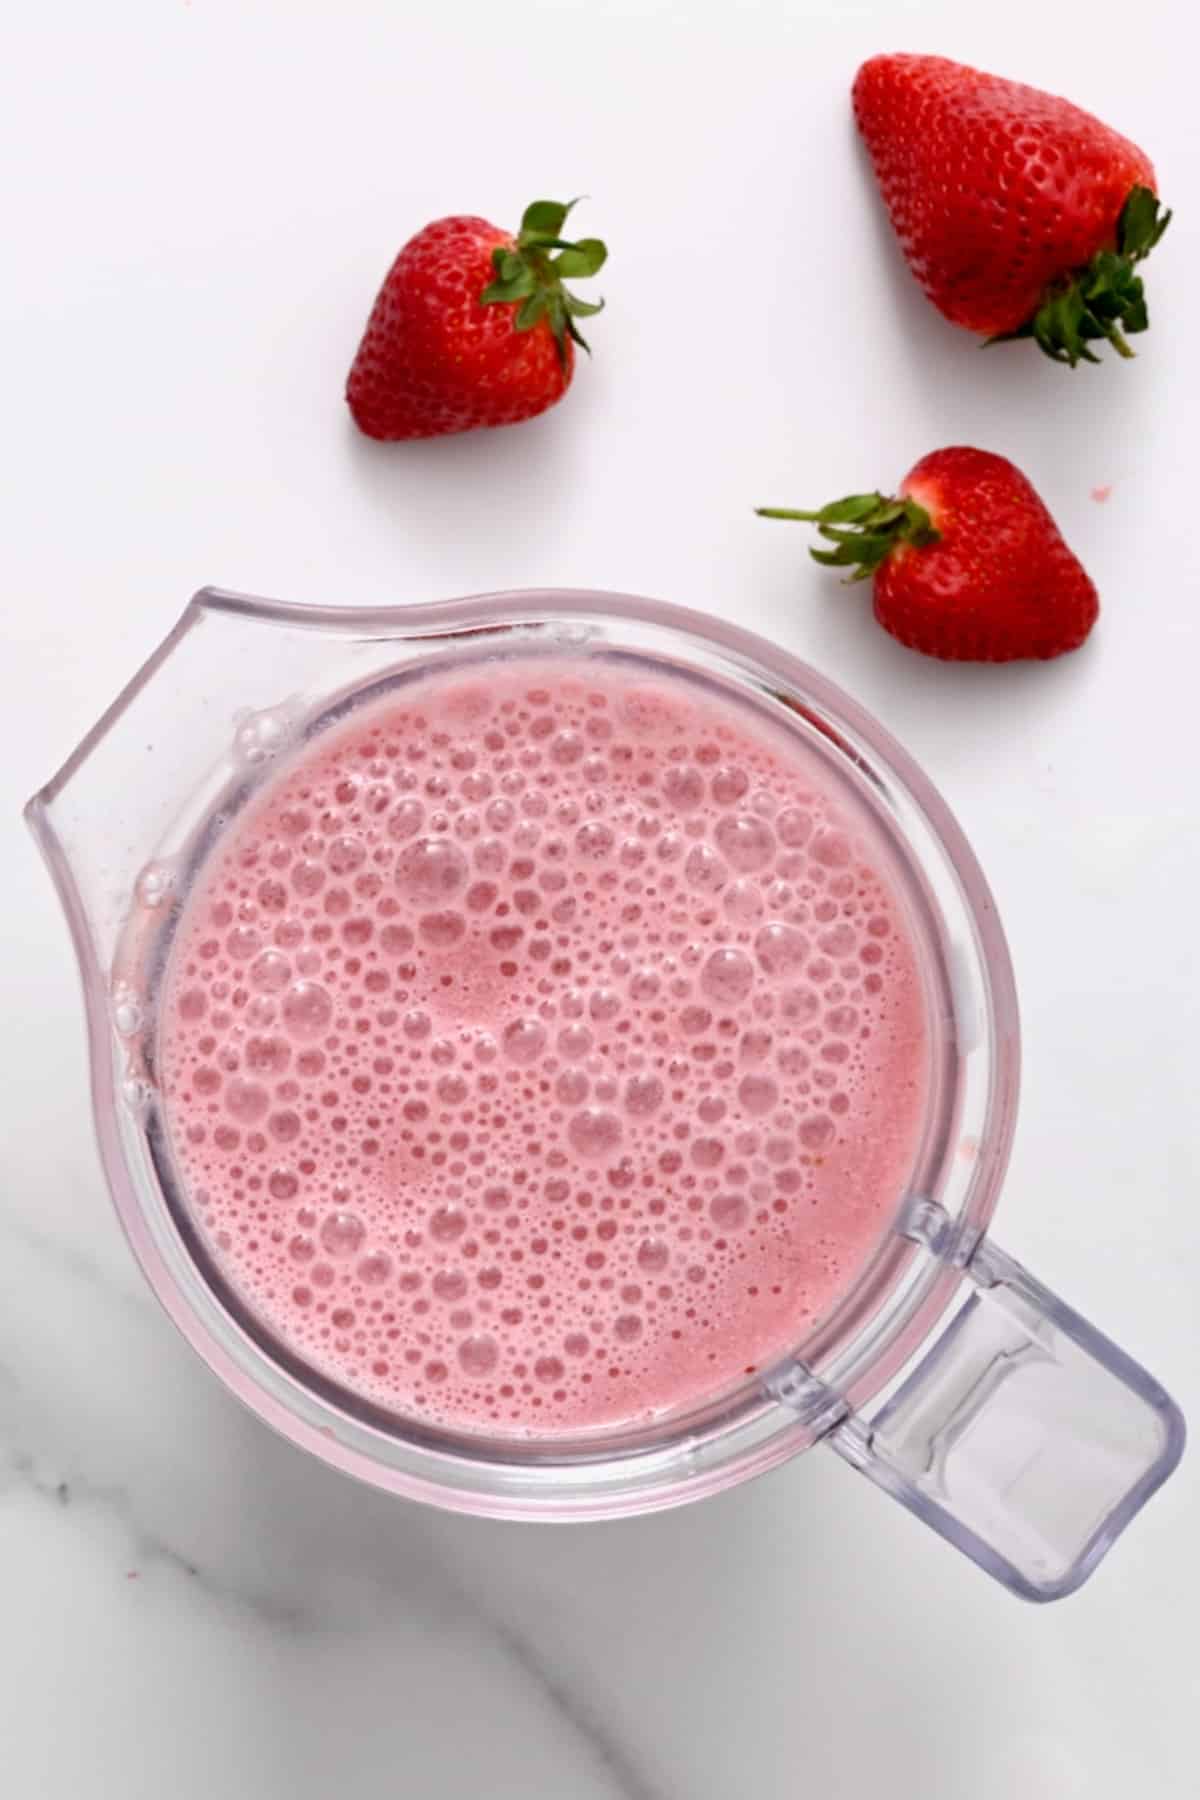 Strawberry milk in a blender and three strawberries next to it